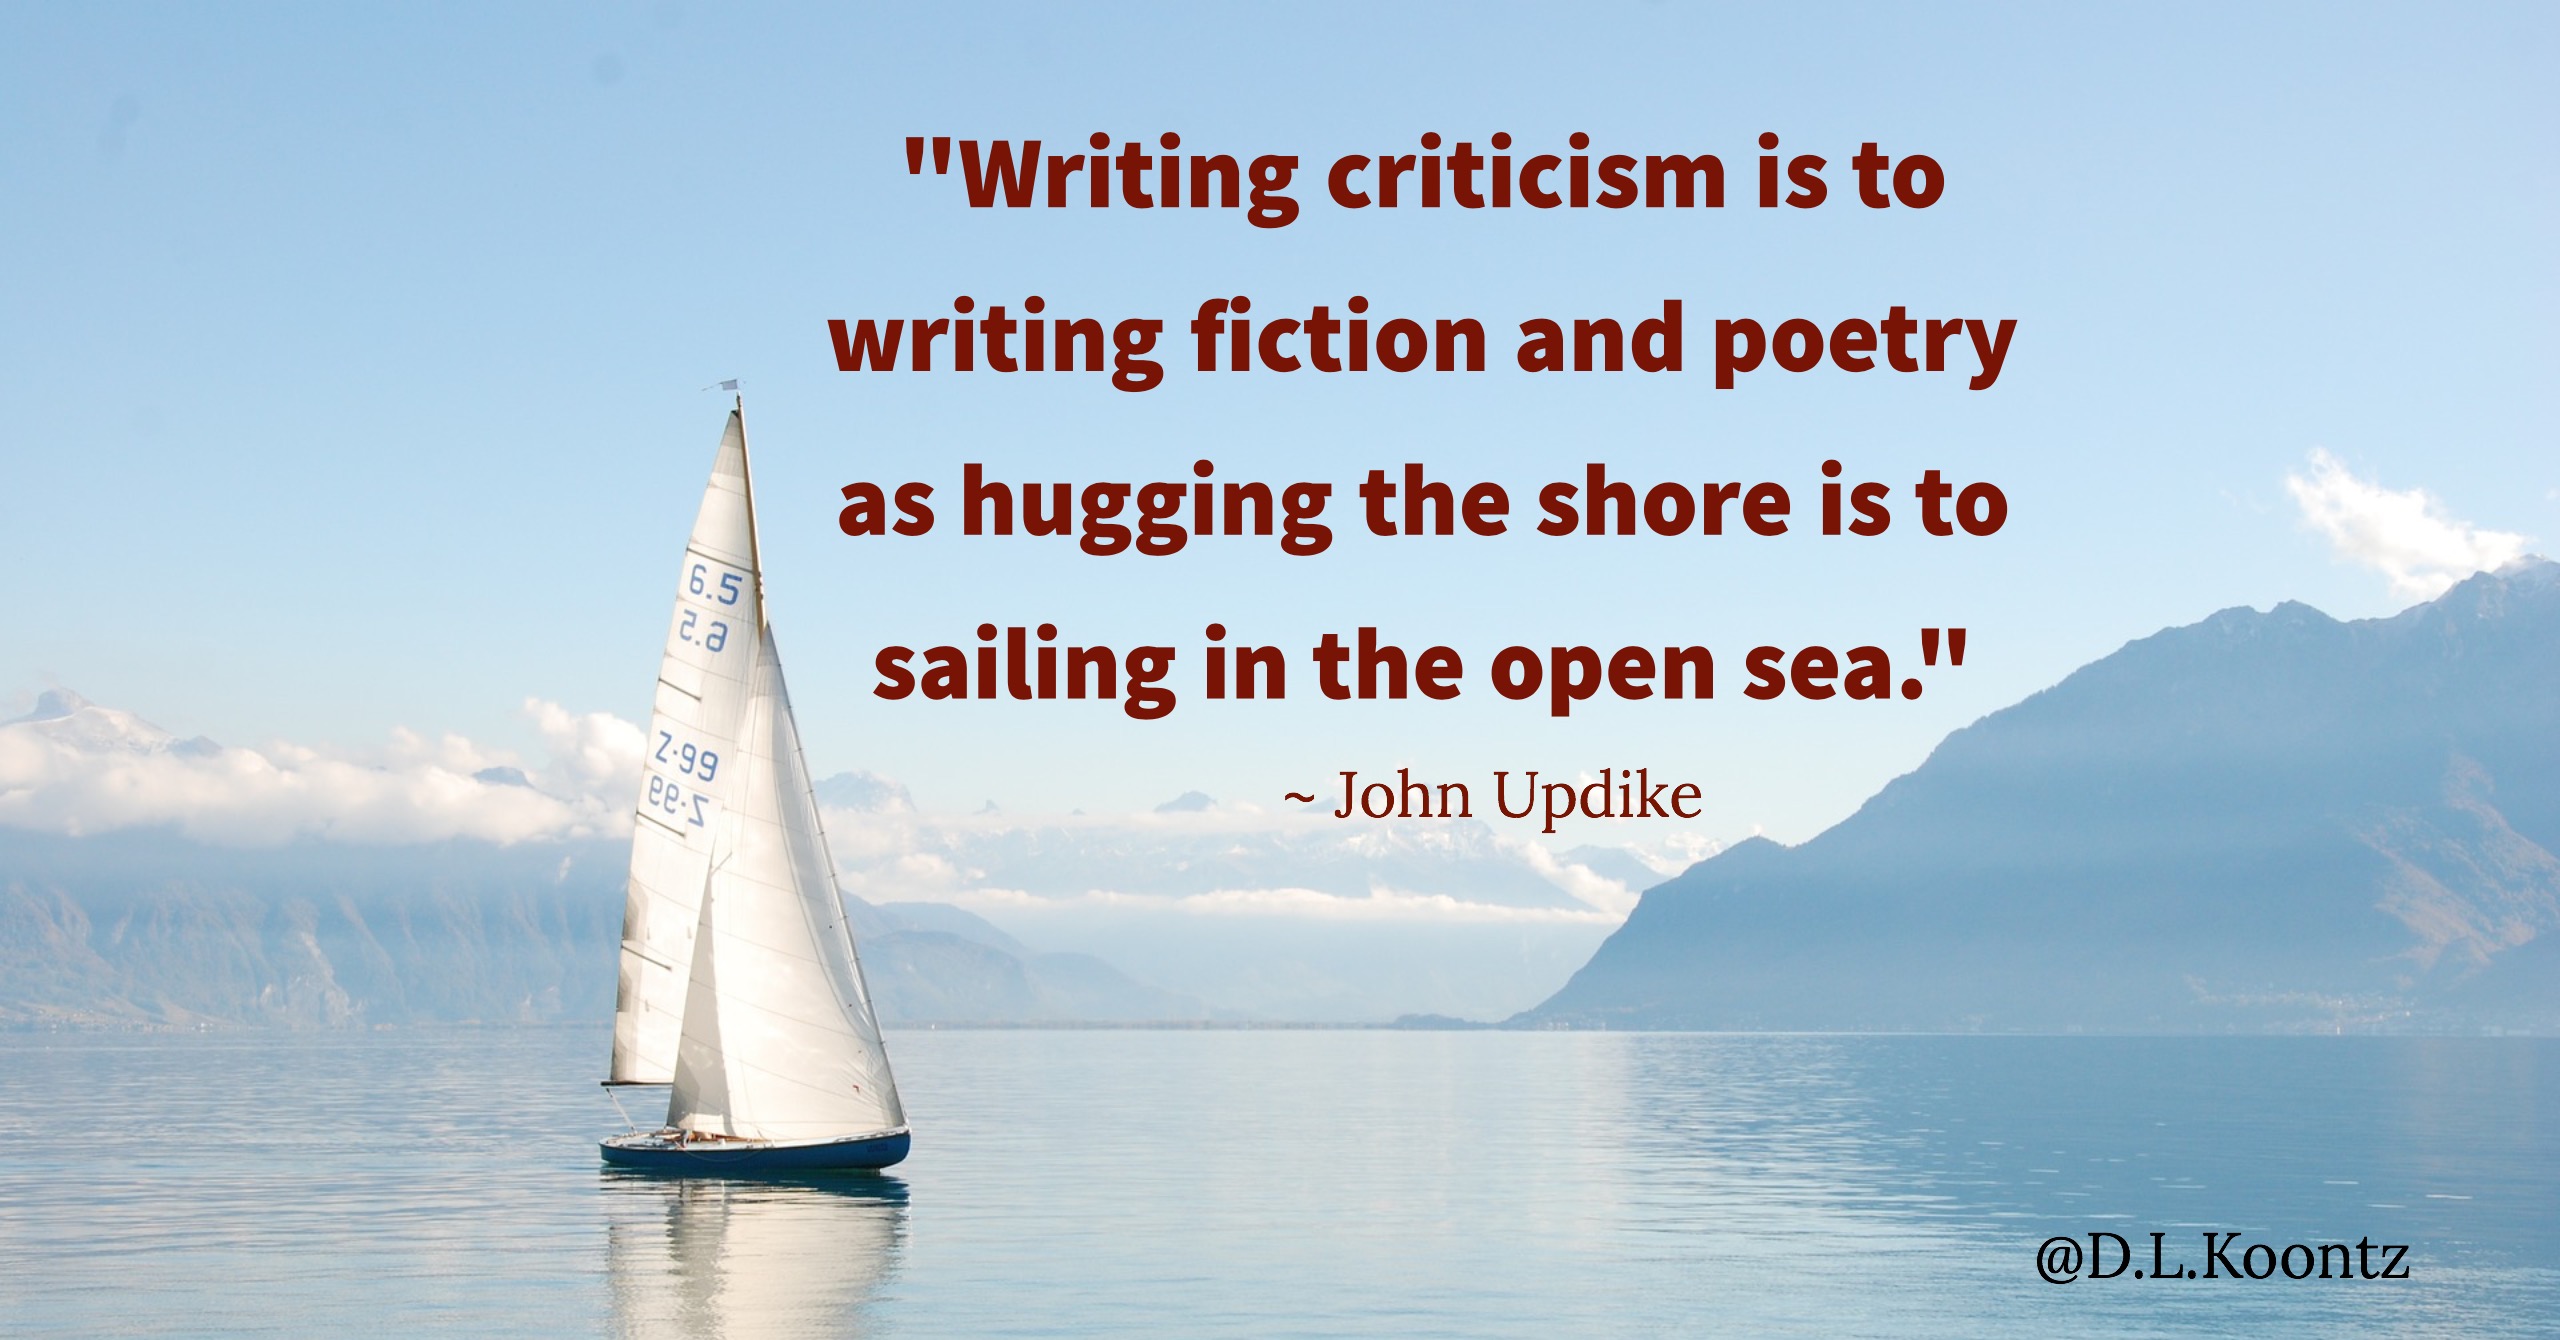 Writing criticism is to writing fiction and poetry as hugging the shore is to sailing in the open sea. -John Updike